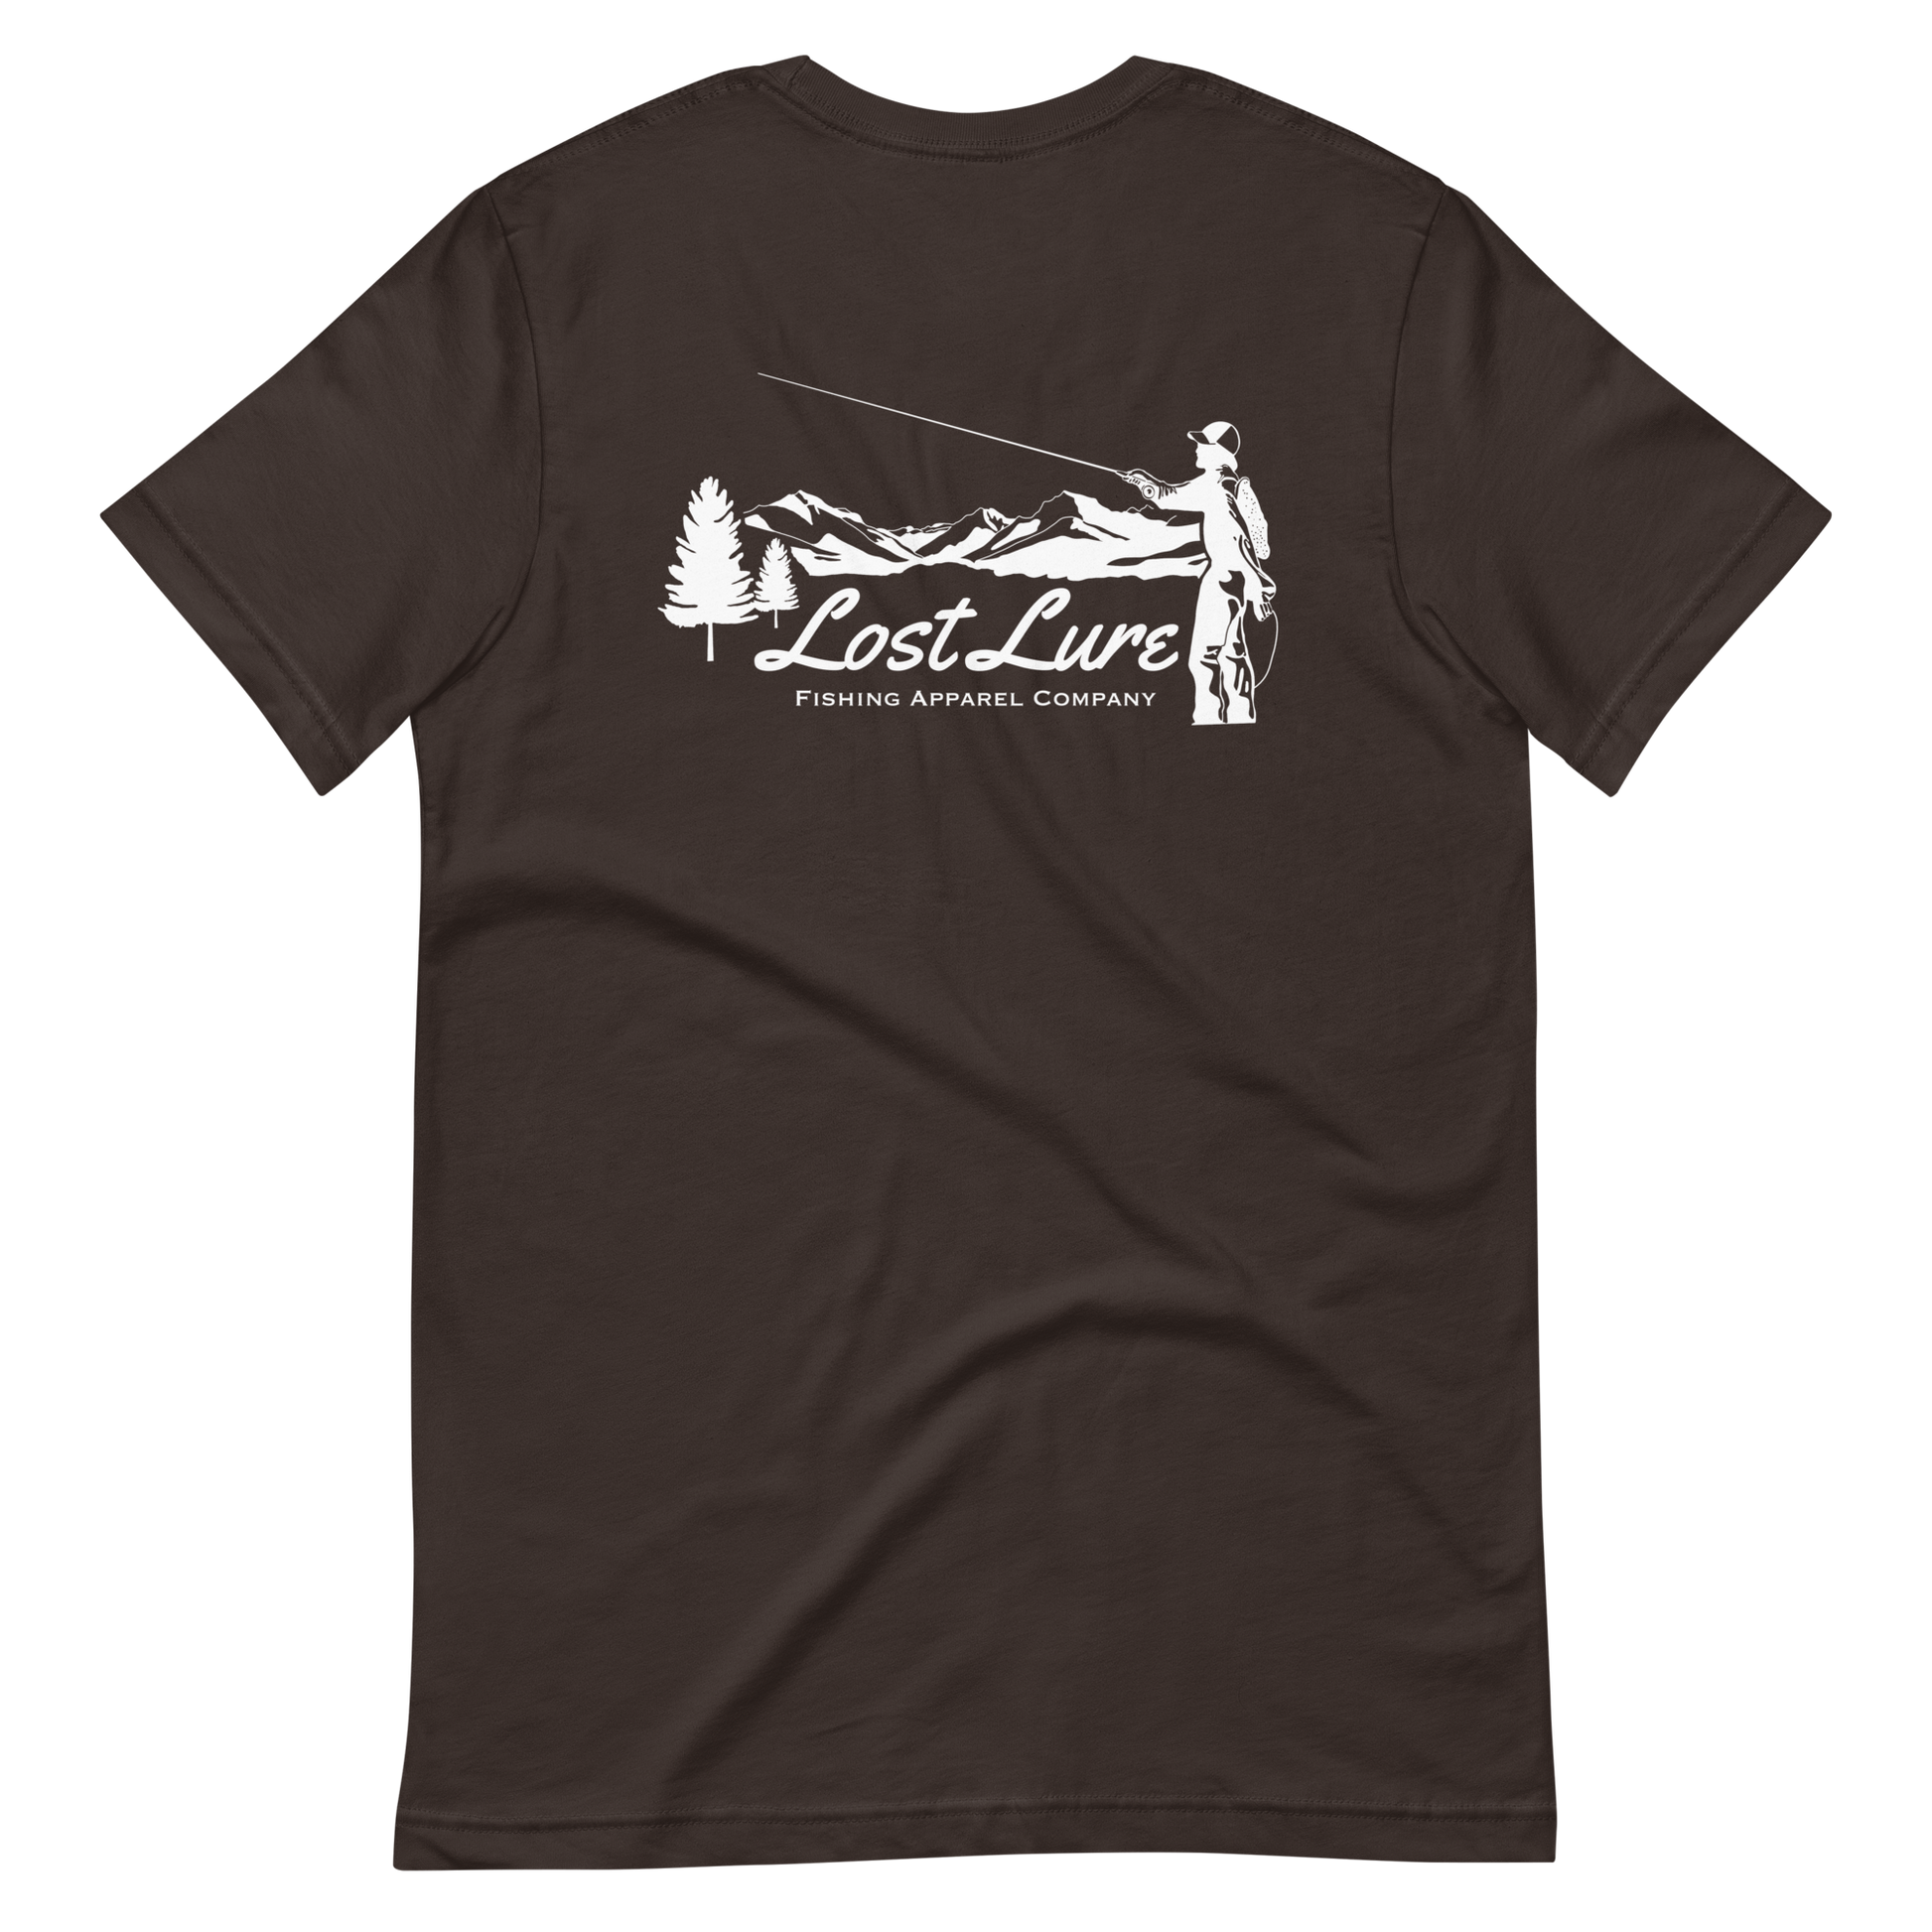 Fly fishing Lost lure shirt. It has a design on the back of the shirt black and white outline a fly fisherman and the Rocky Mountains. Brown fishing shirt, back side